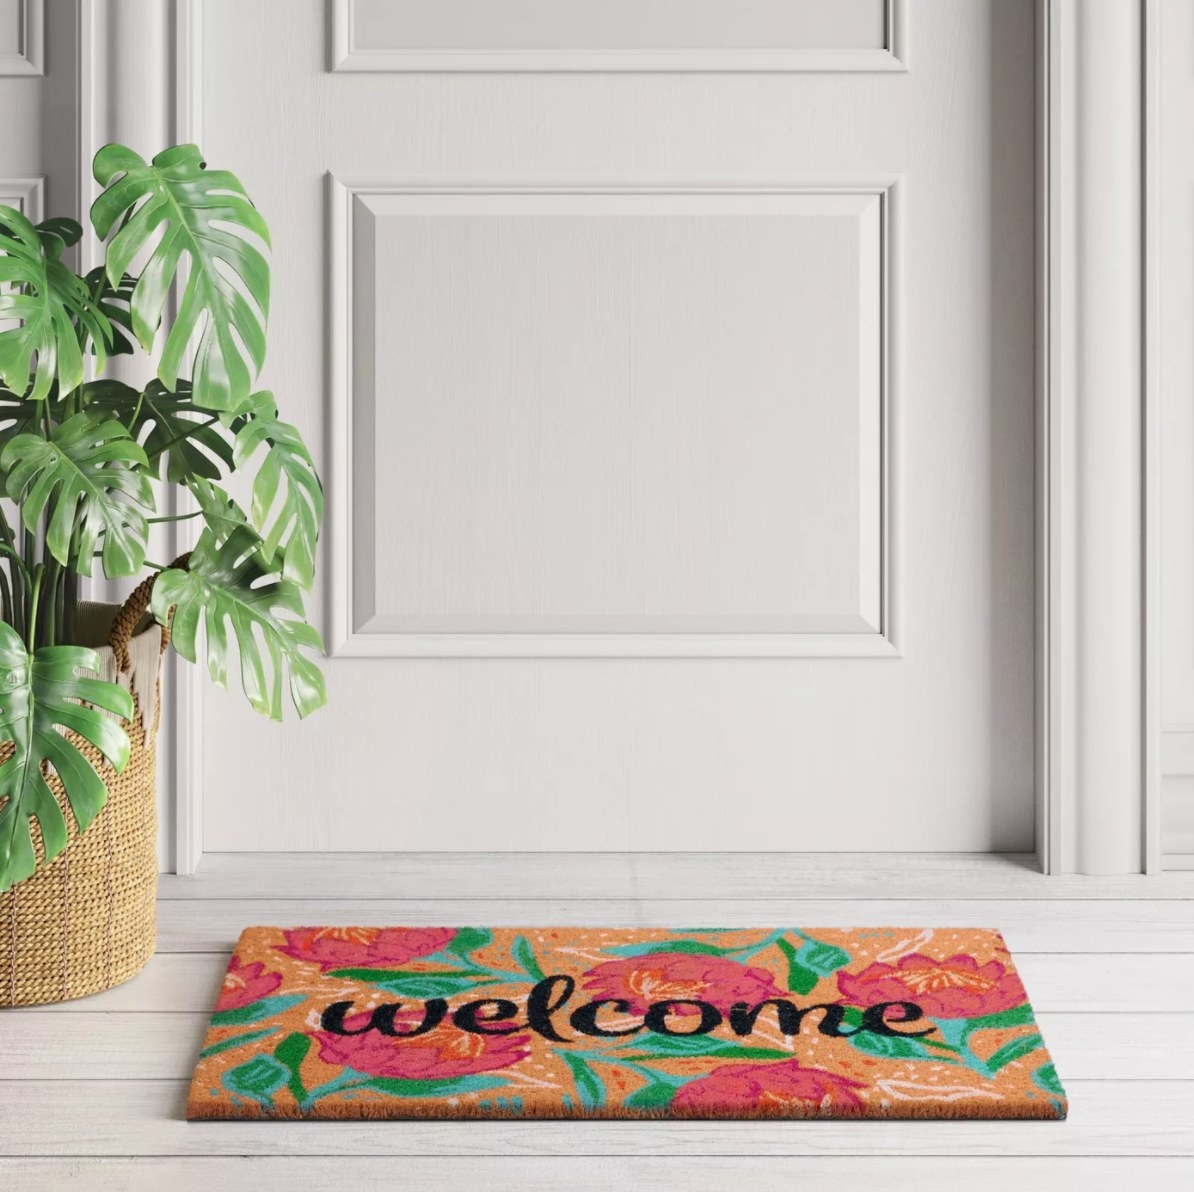 The &#x27;welcome&#x27; doormat in black lettering with a floral background on a doorstep